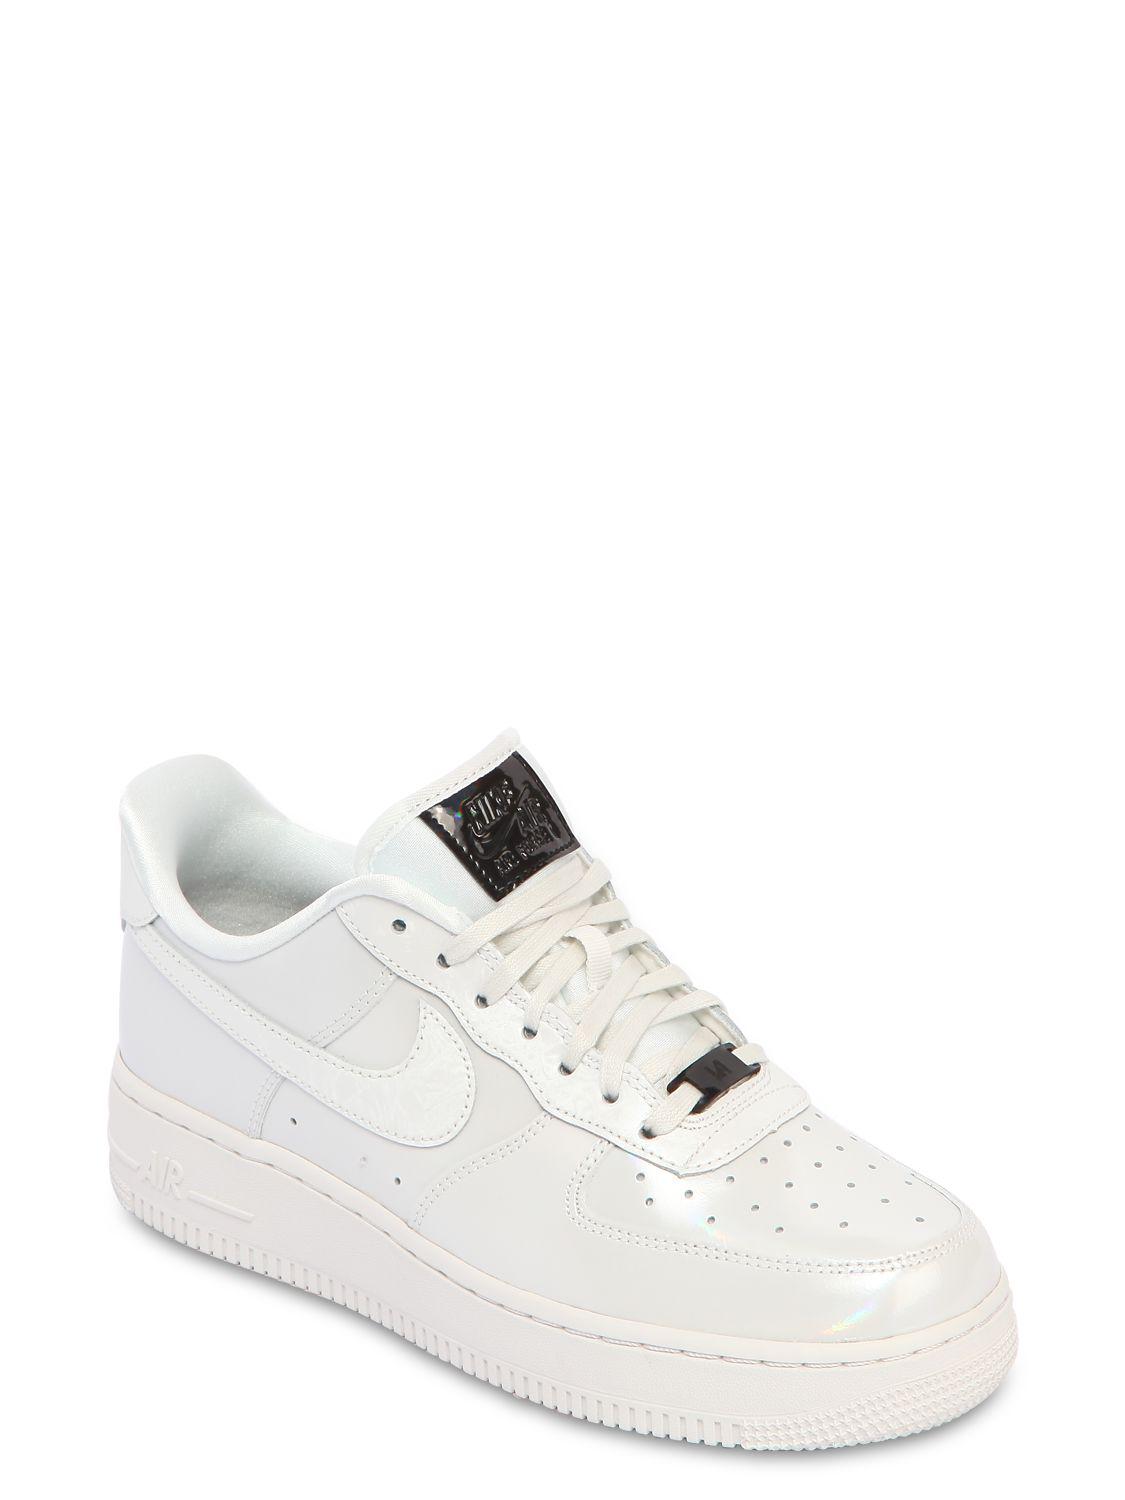 Nike Leather Air Force 1 07 Lux Iridescent Sneakers in White - Lyst